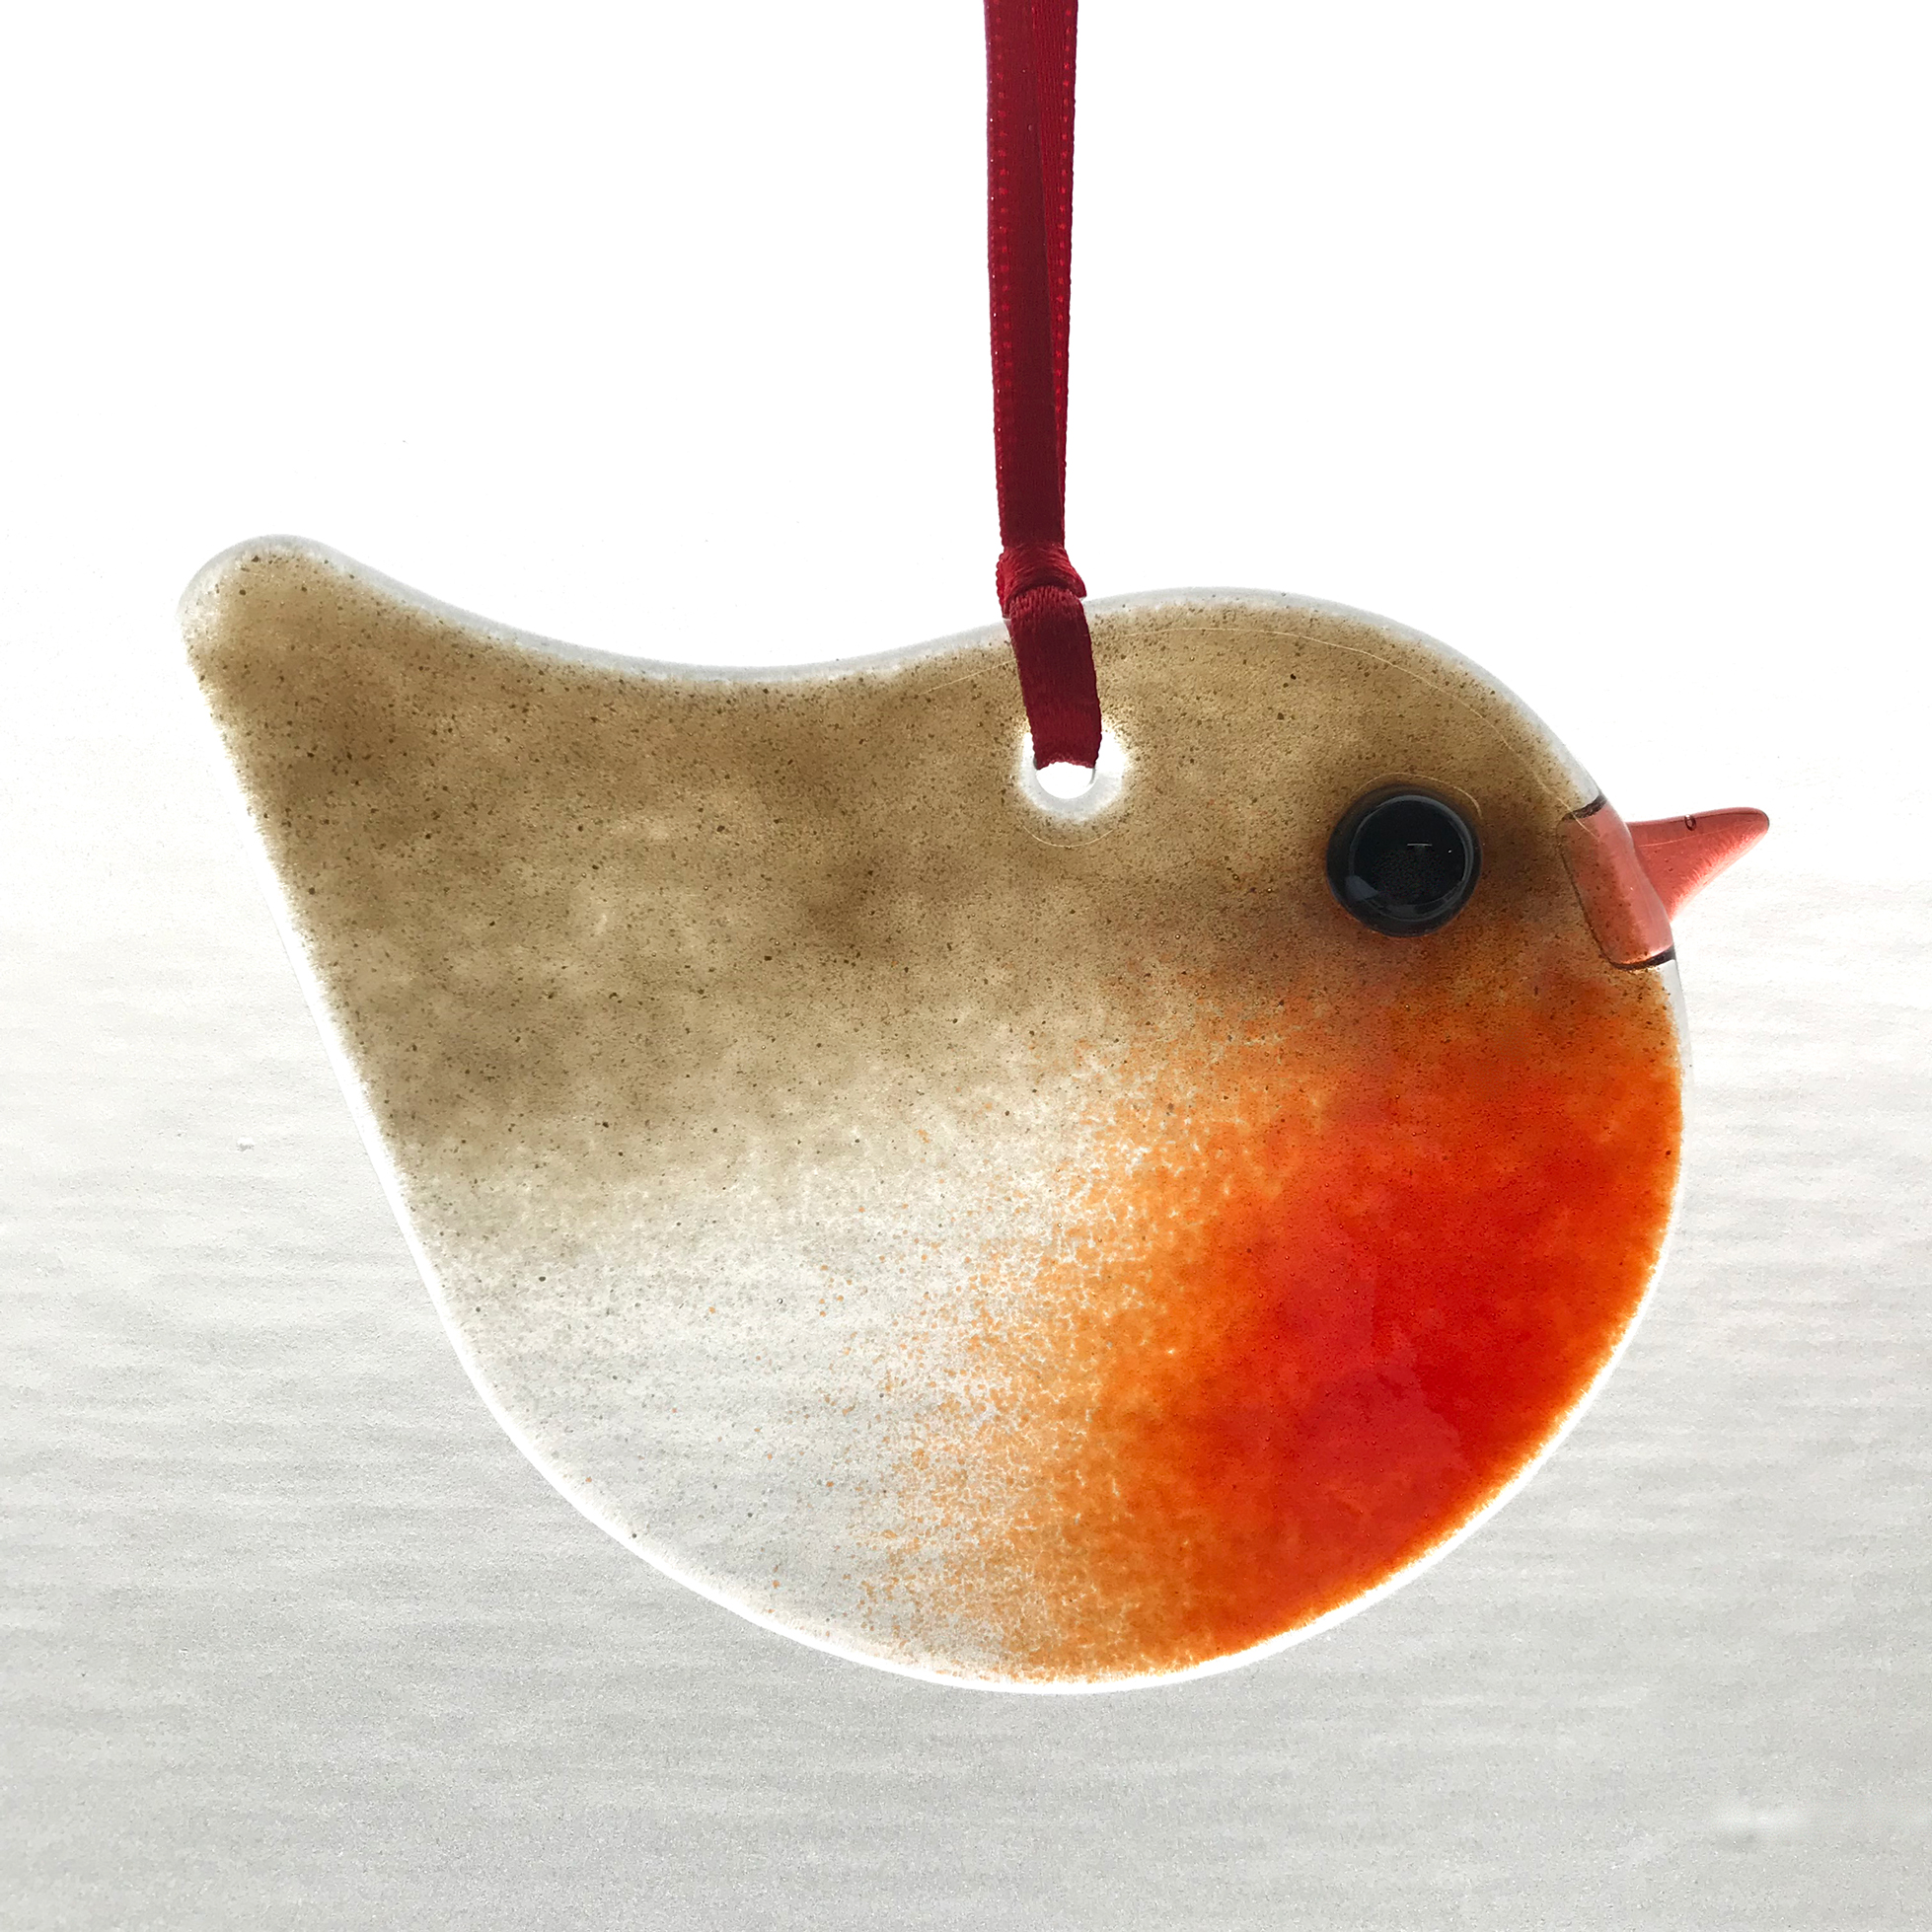 Fused glass robin with red satin ribbon to hang. A thoughtful bereavement gift or cheerul Christmas present.